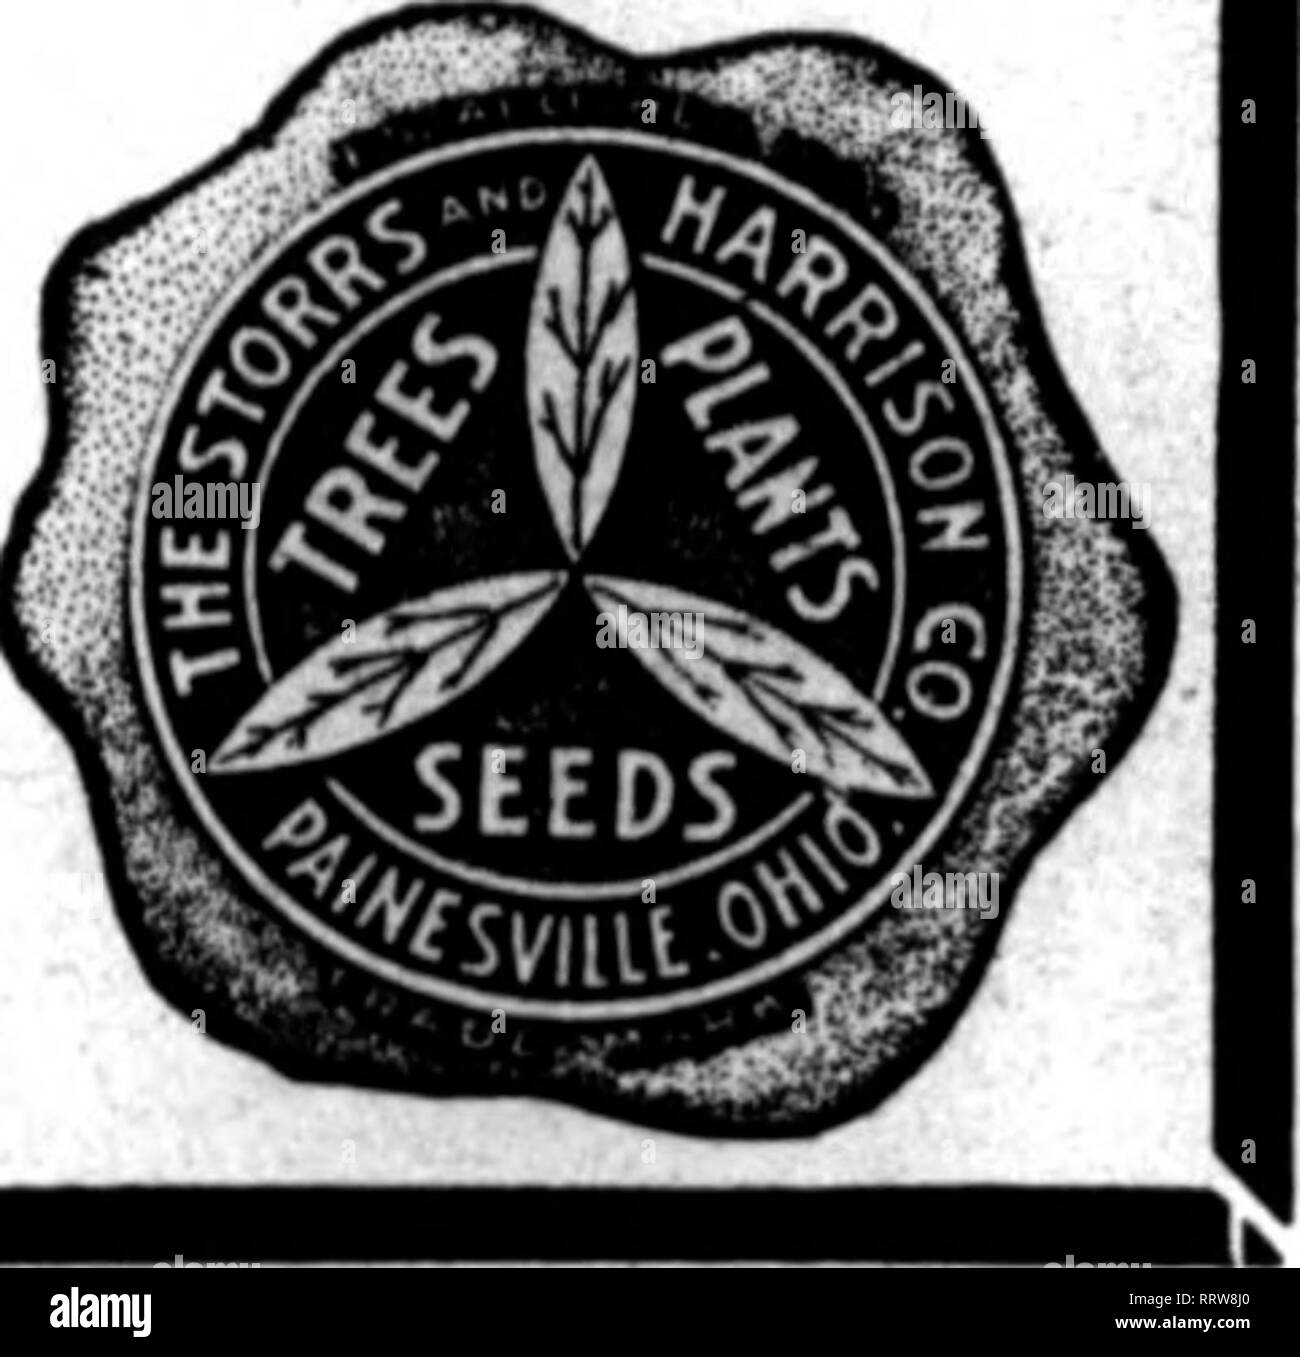 . Florists' review [microform]. Floriculture. 44 Superb Quality''( SEEDS FOR FLORISTS THE STORRS &amp; HARRISON CO.'S SUPERB MIXTURE OF GIANT PANSY SEED Ckintaiaa the Ultimate in Giant Panaies. You cannot buy a better mixture of Pansy Seed at any price. Trade Packet, 50c: H oz., $1.25; oz., $4.00. We carry in stock all named and separate colors of Oiant Pansies, also the best strains of Odler, Gassier, Bugnot, Trimardeau, etc. (See oar trade list for prices.) Cineraria Grandiflora ^li^o'rtlraVja^kl^^^^^^^^^ Bellis Perennis (English Daisy) Longfellow (red). Snowball (white), Tr. Pkt., 35c: Mixe Stock Photo